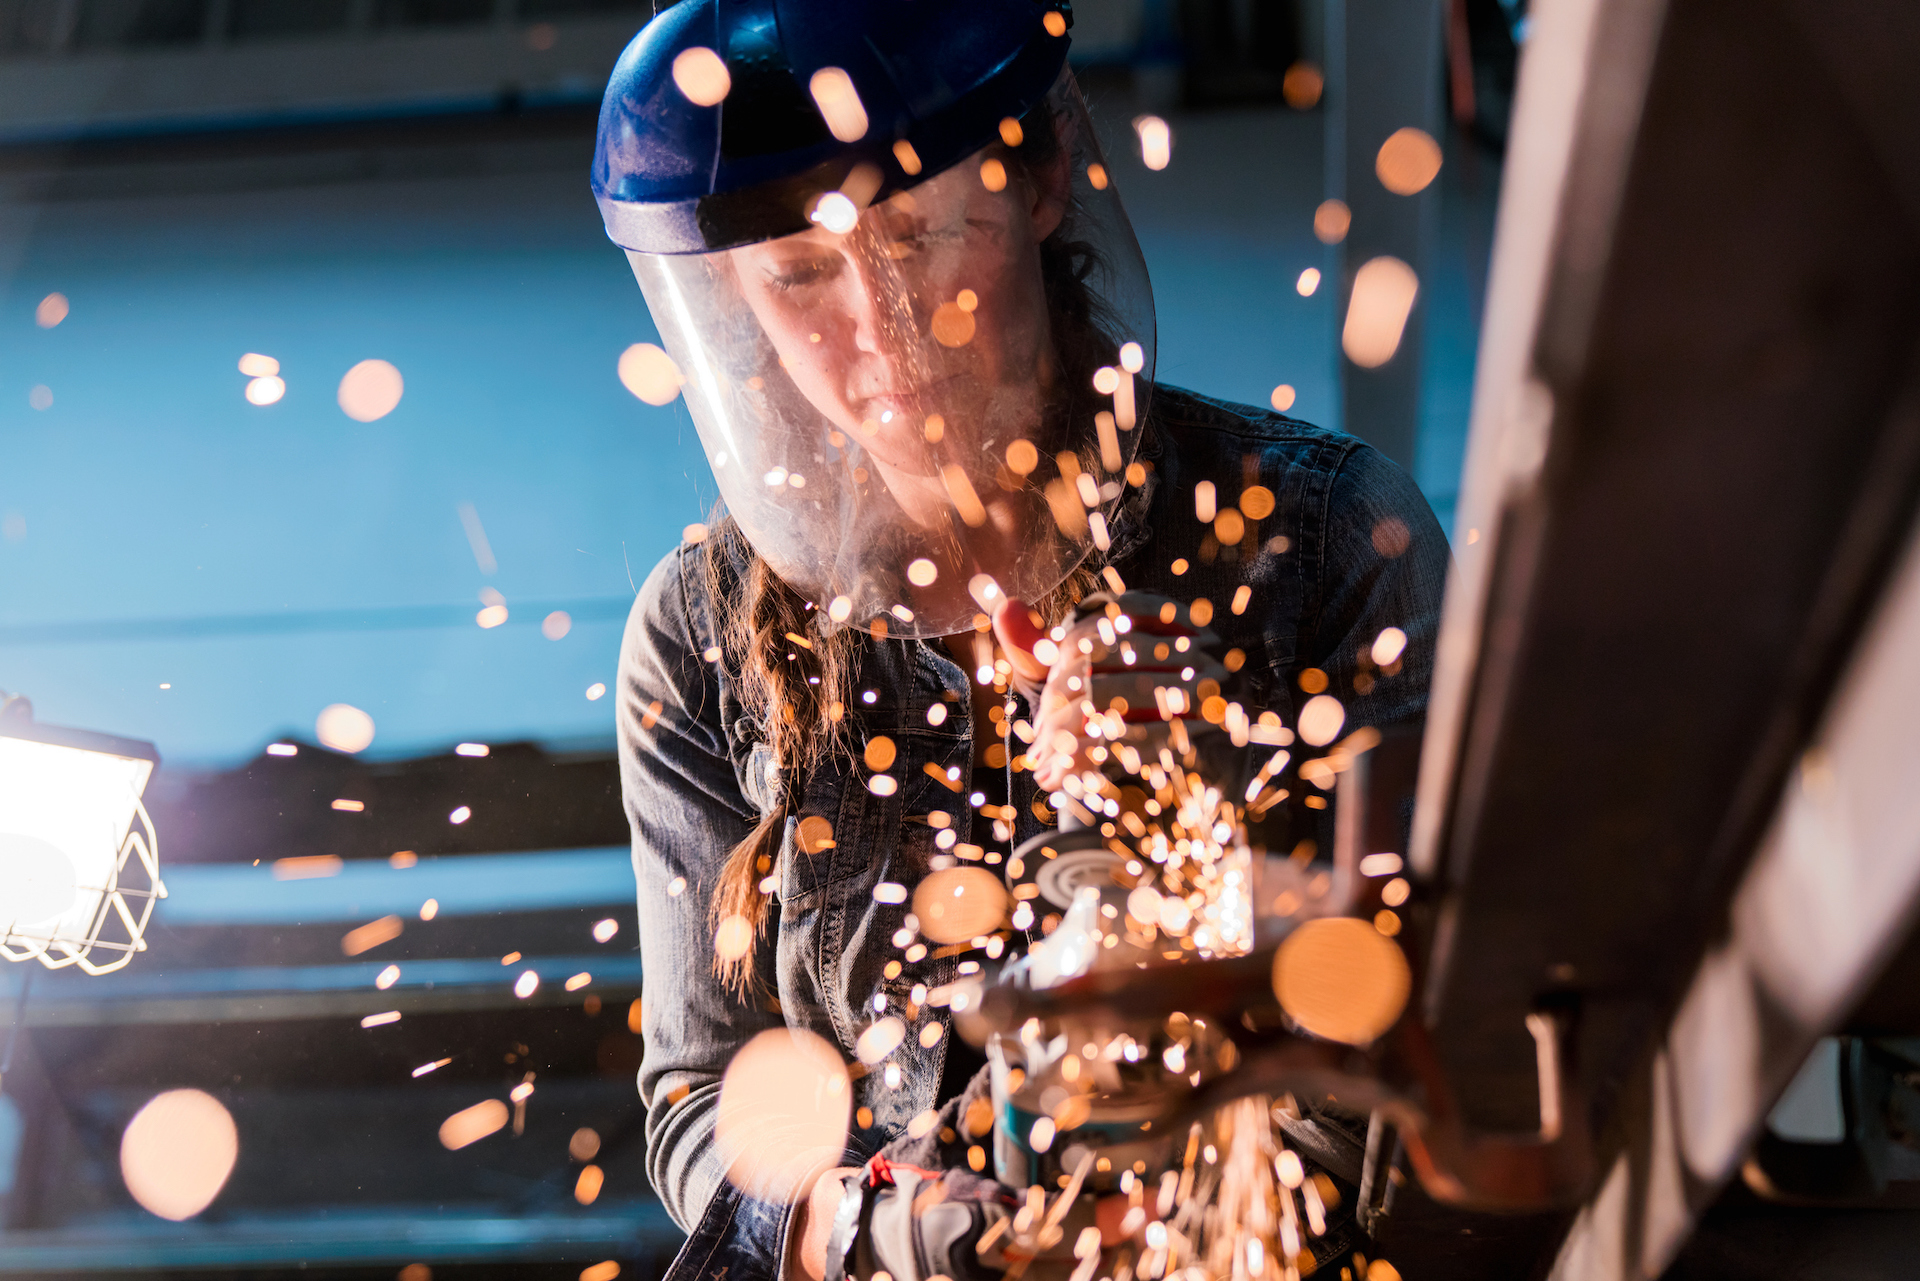 metalworker wearing protective gear with sparks flying